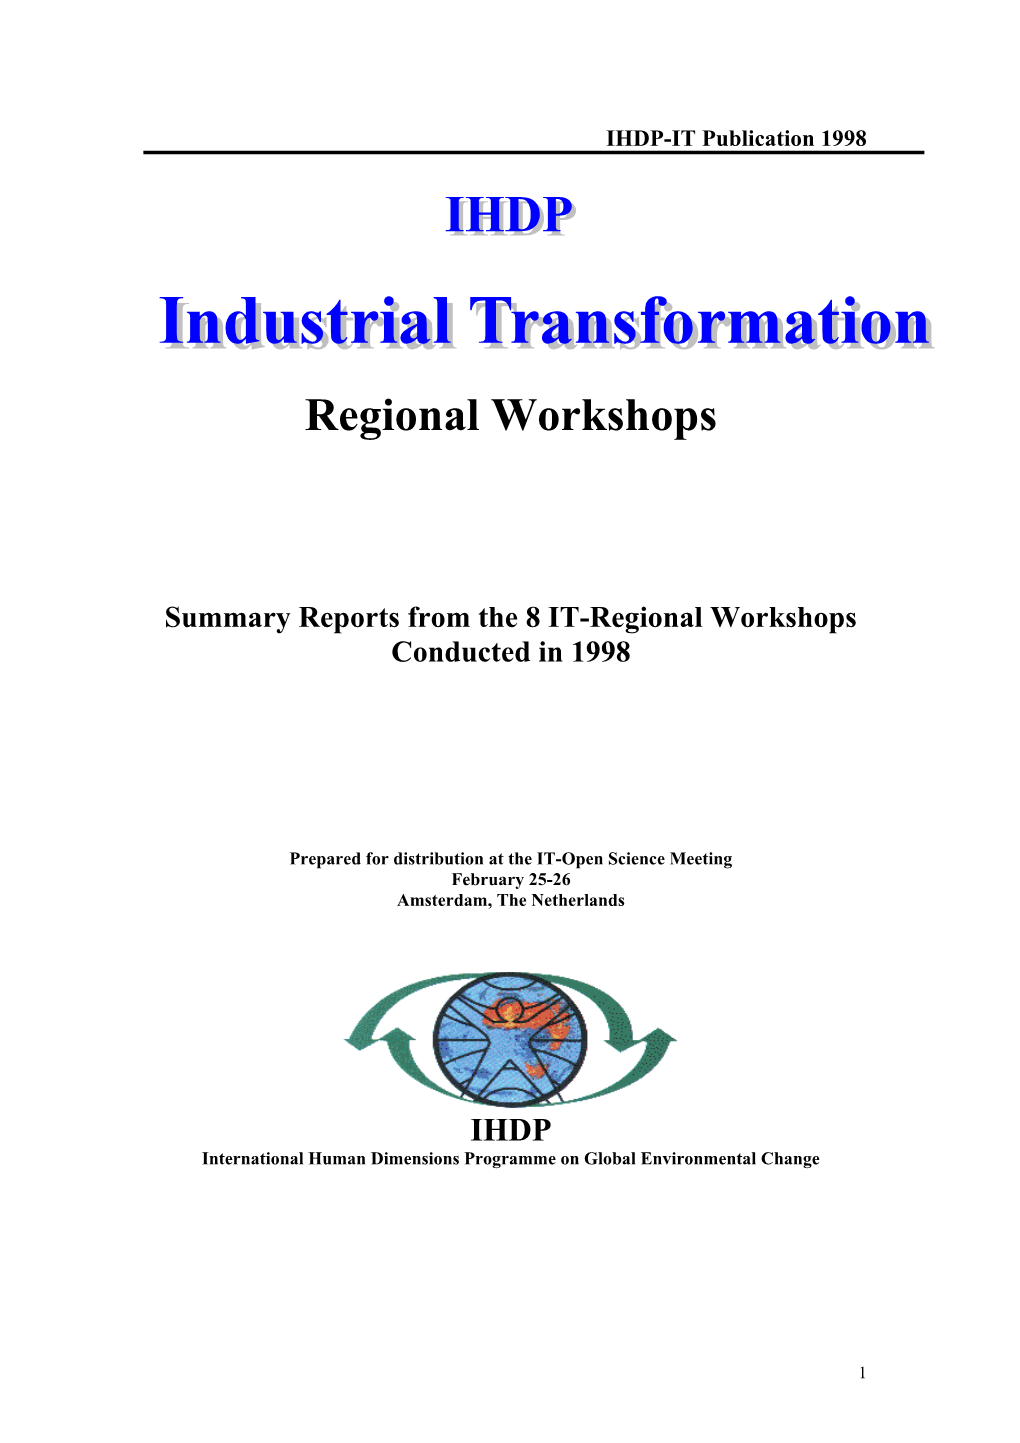 Summary Reports from the 8 IT-Regional Workshops